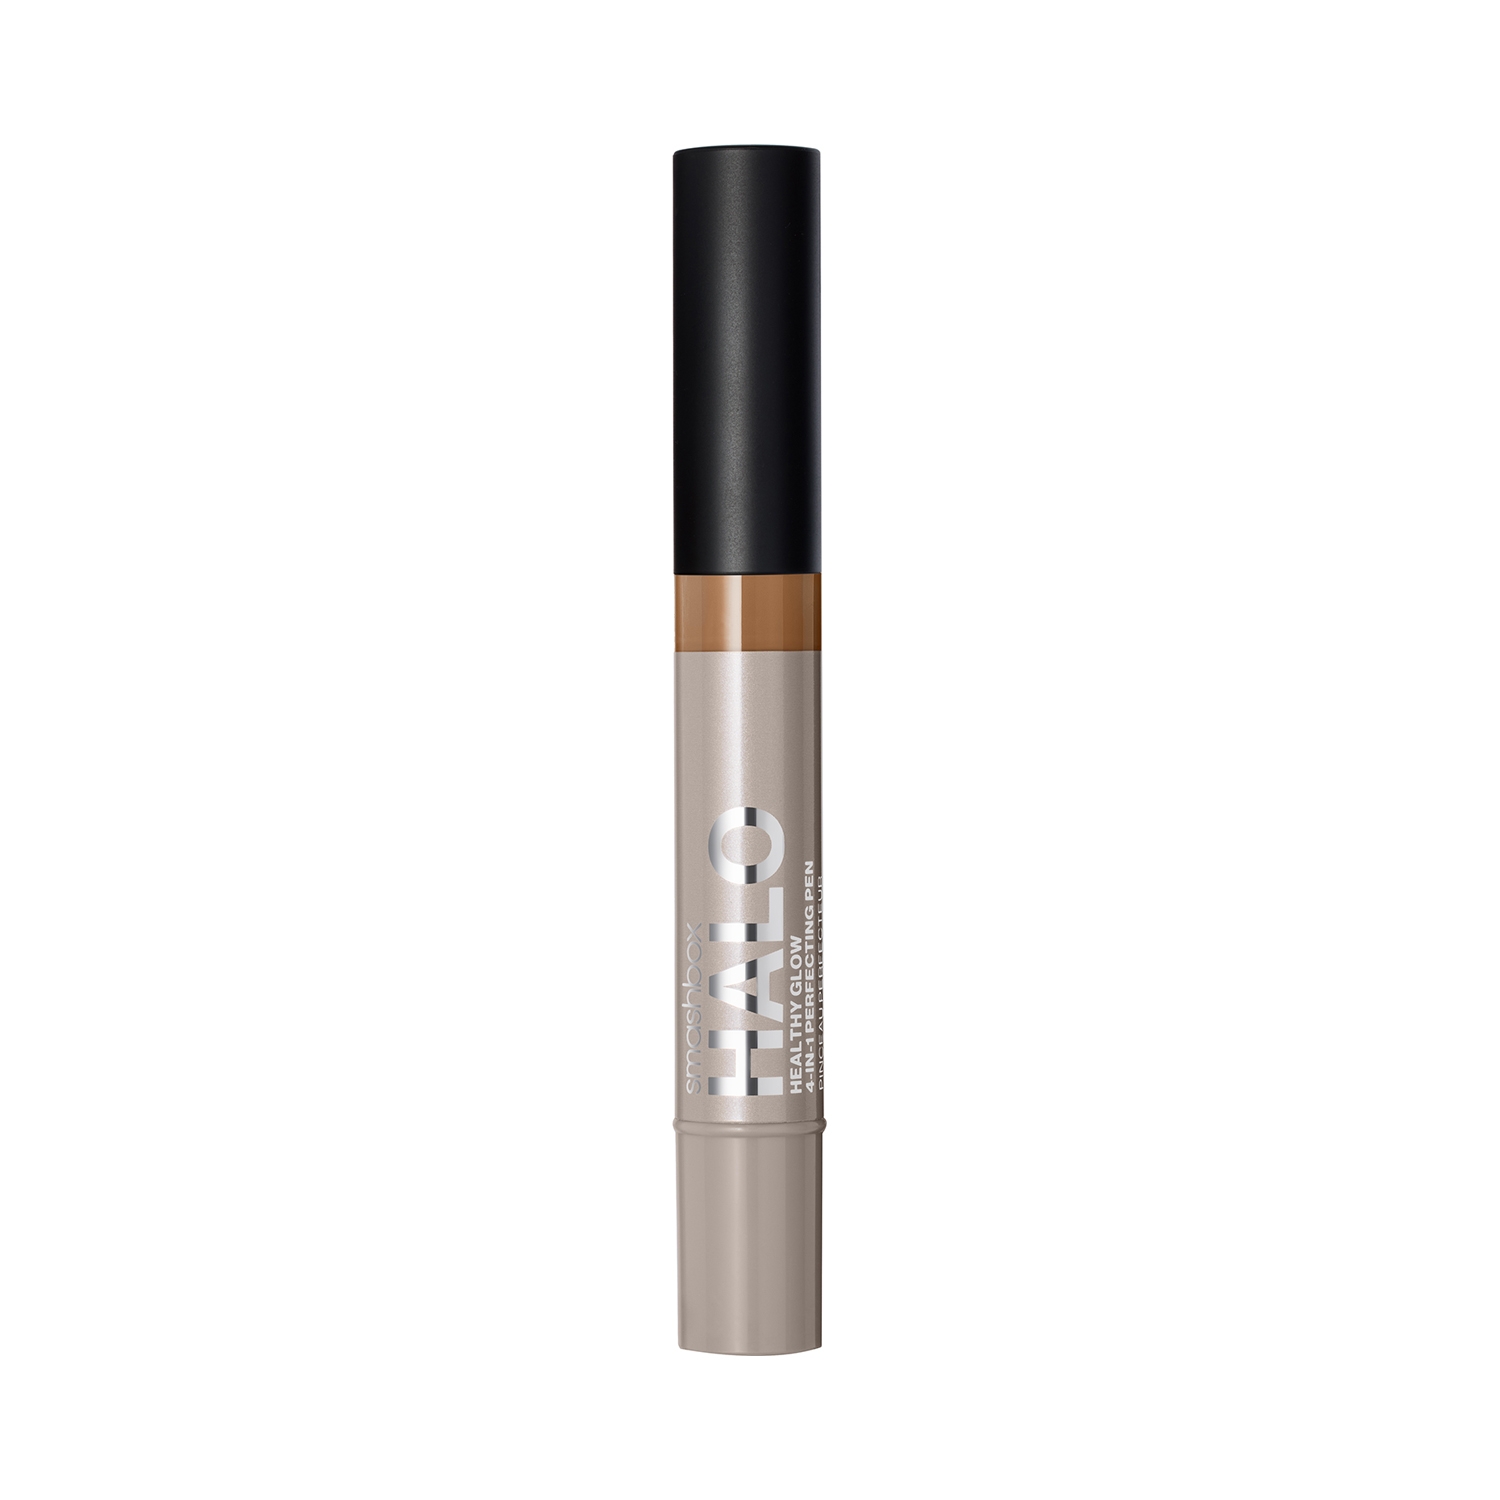 Smashbox | Smashbox Halo Healthy Glow 4-In-1 Perfecting Concealer Pen - M20N (3.5ml)